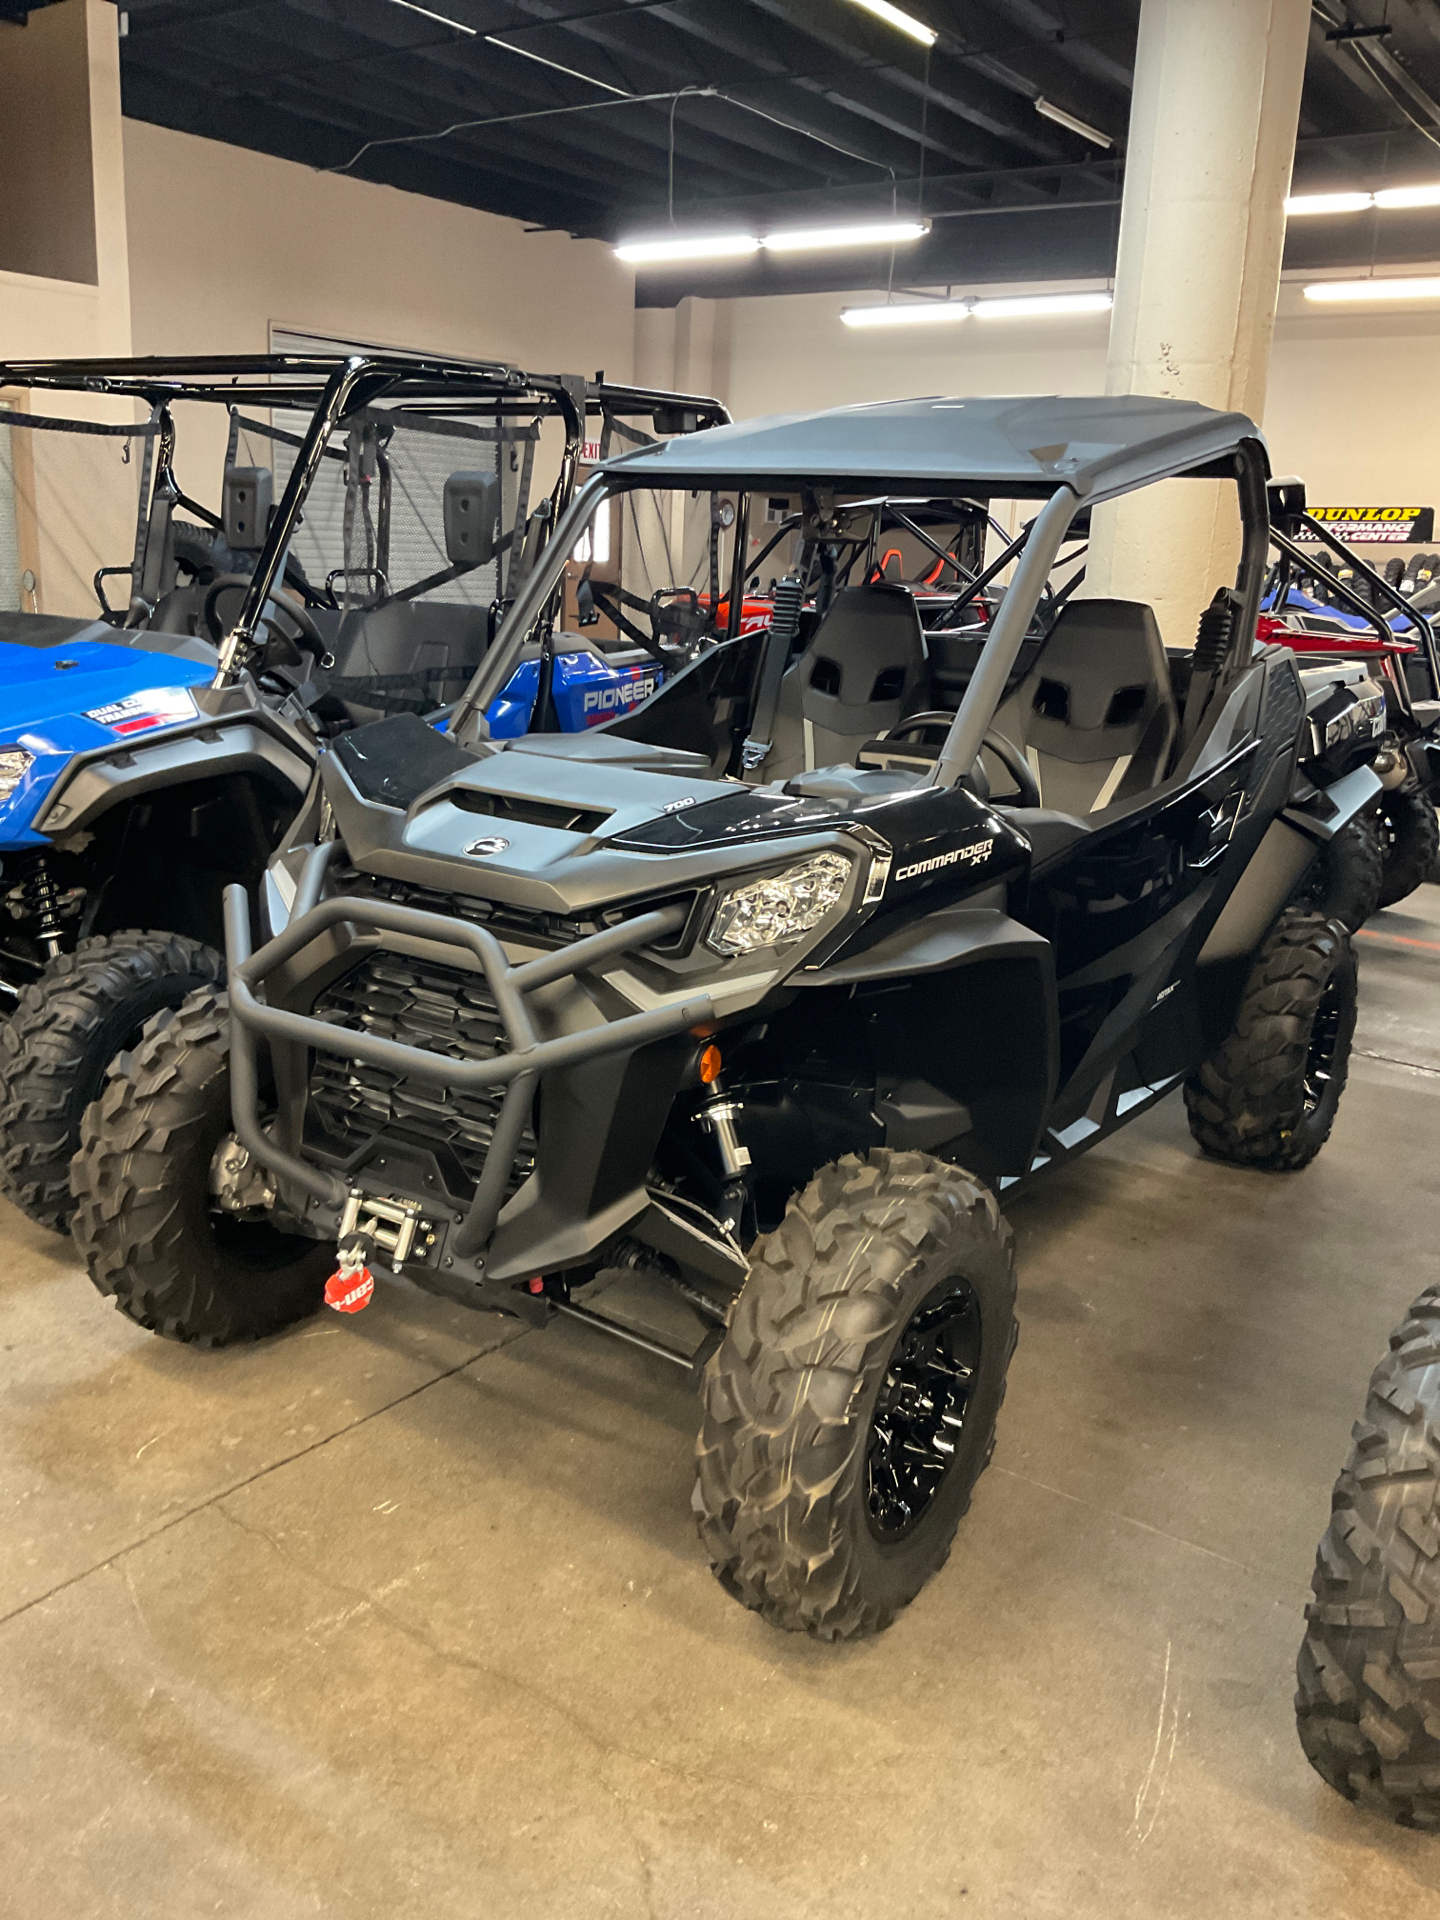 2022 Can-Am Commander XT 700 in Bakersfield, California - Photo 1